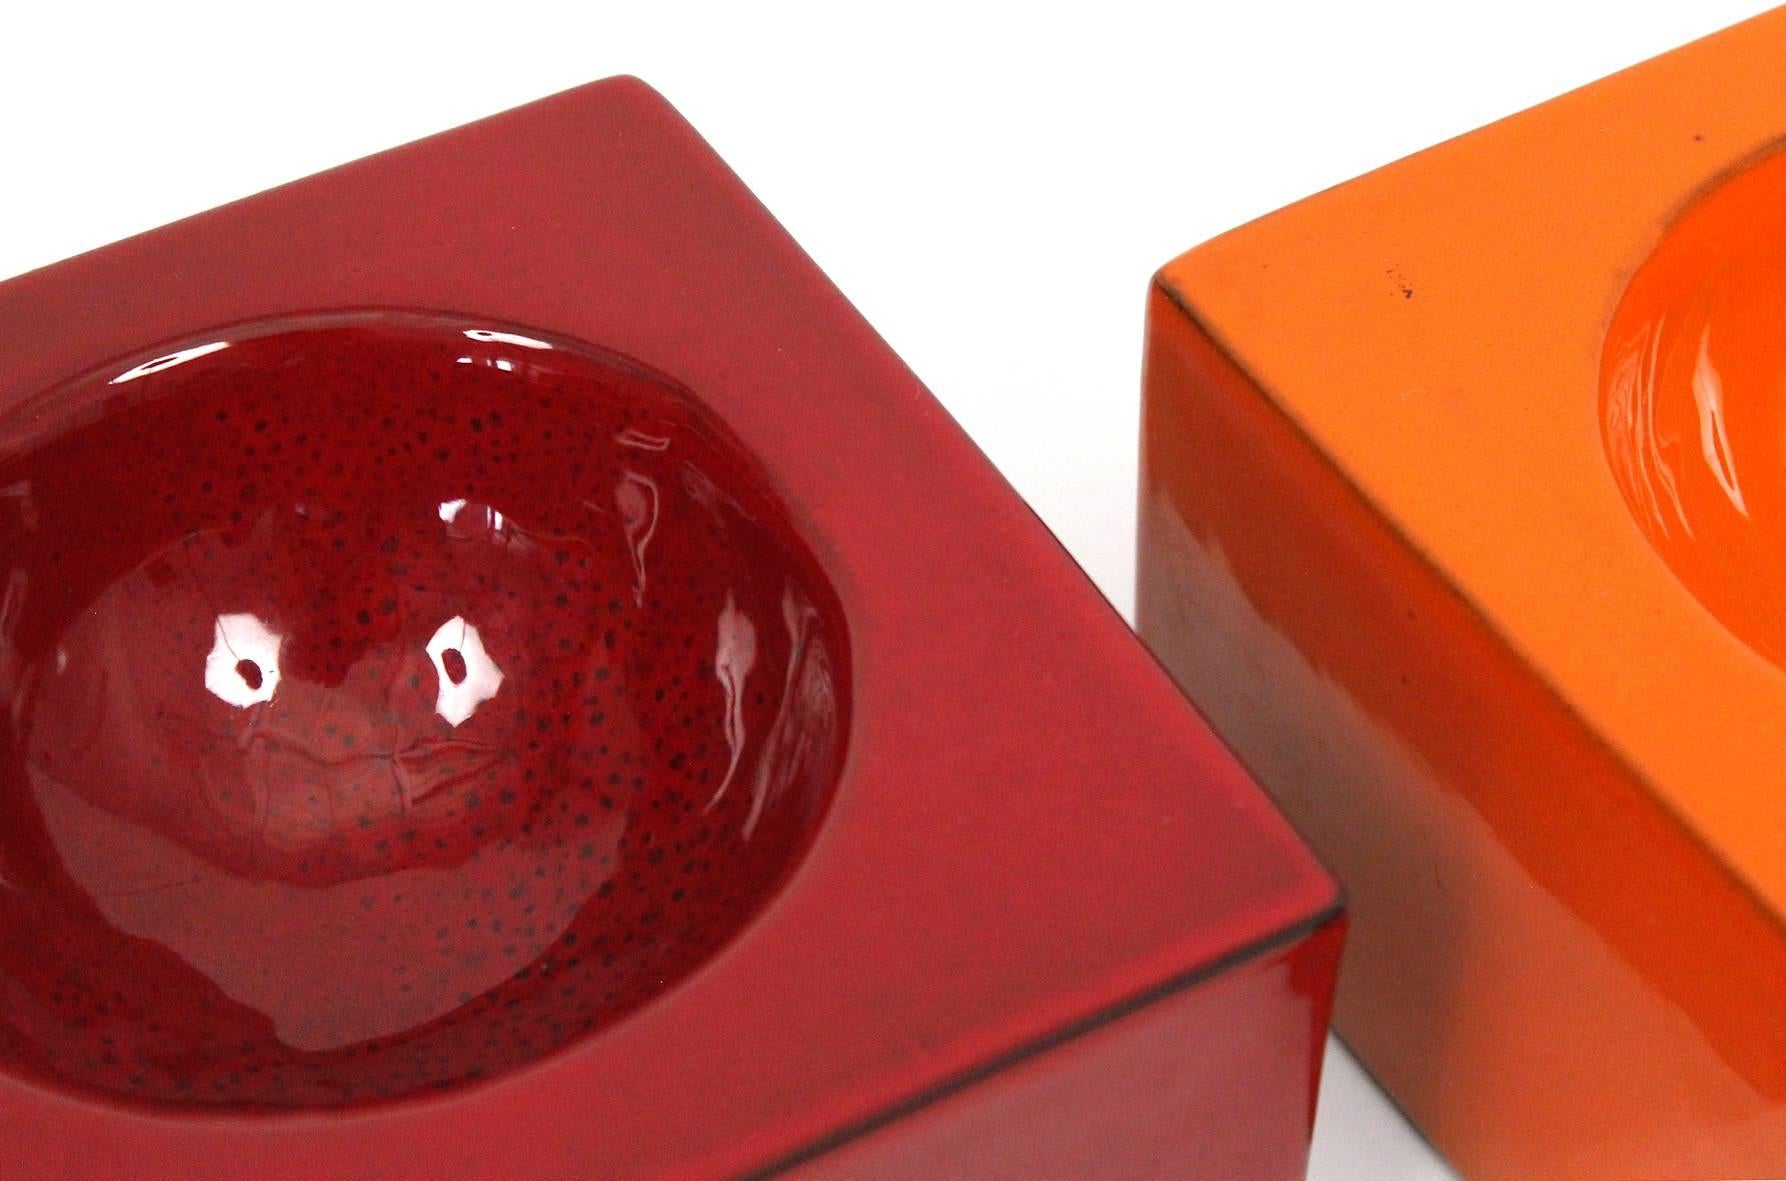 Ceramic Ettore Sottsass for Il Sestante Pottery Bowls